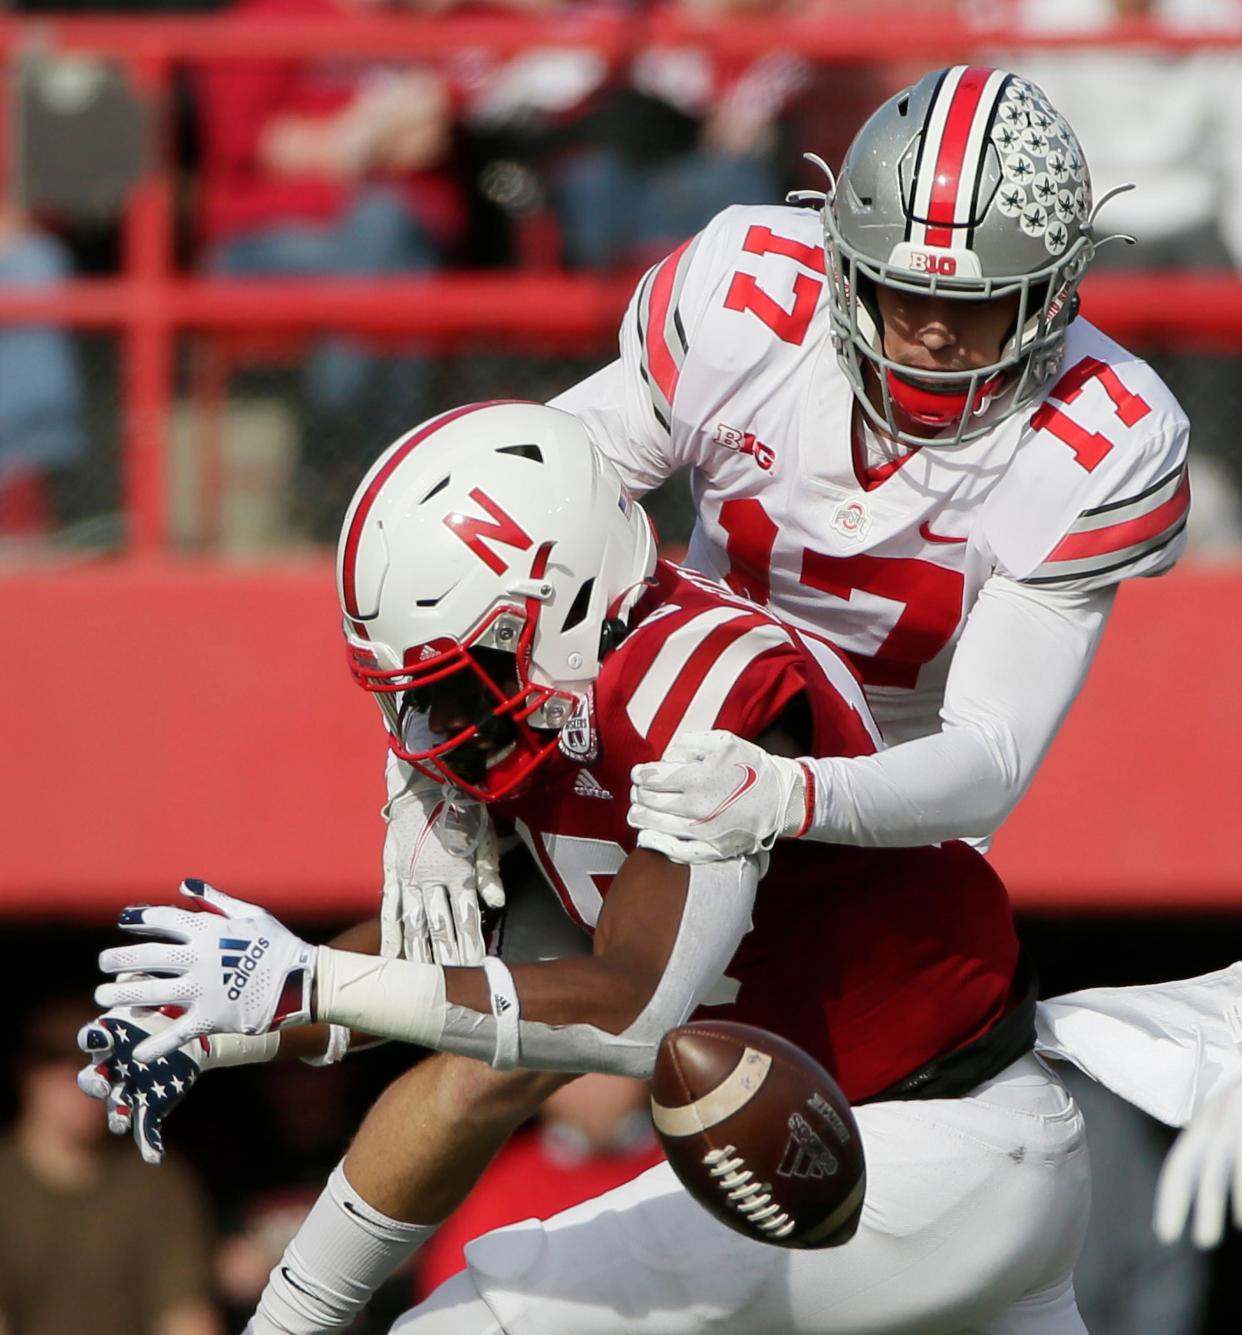 Ohio State Buckeyes safety Bryson Shaw (17) defends Nebraska Cornhuskers defensive back Malik Williams (15) on a passing play during Saturday's NCAA Division I football game at Memorial Stadium in Lincoln, Neb., on November 6, 2021.